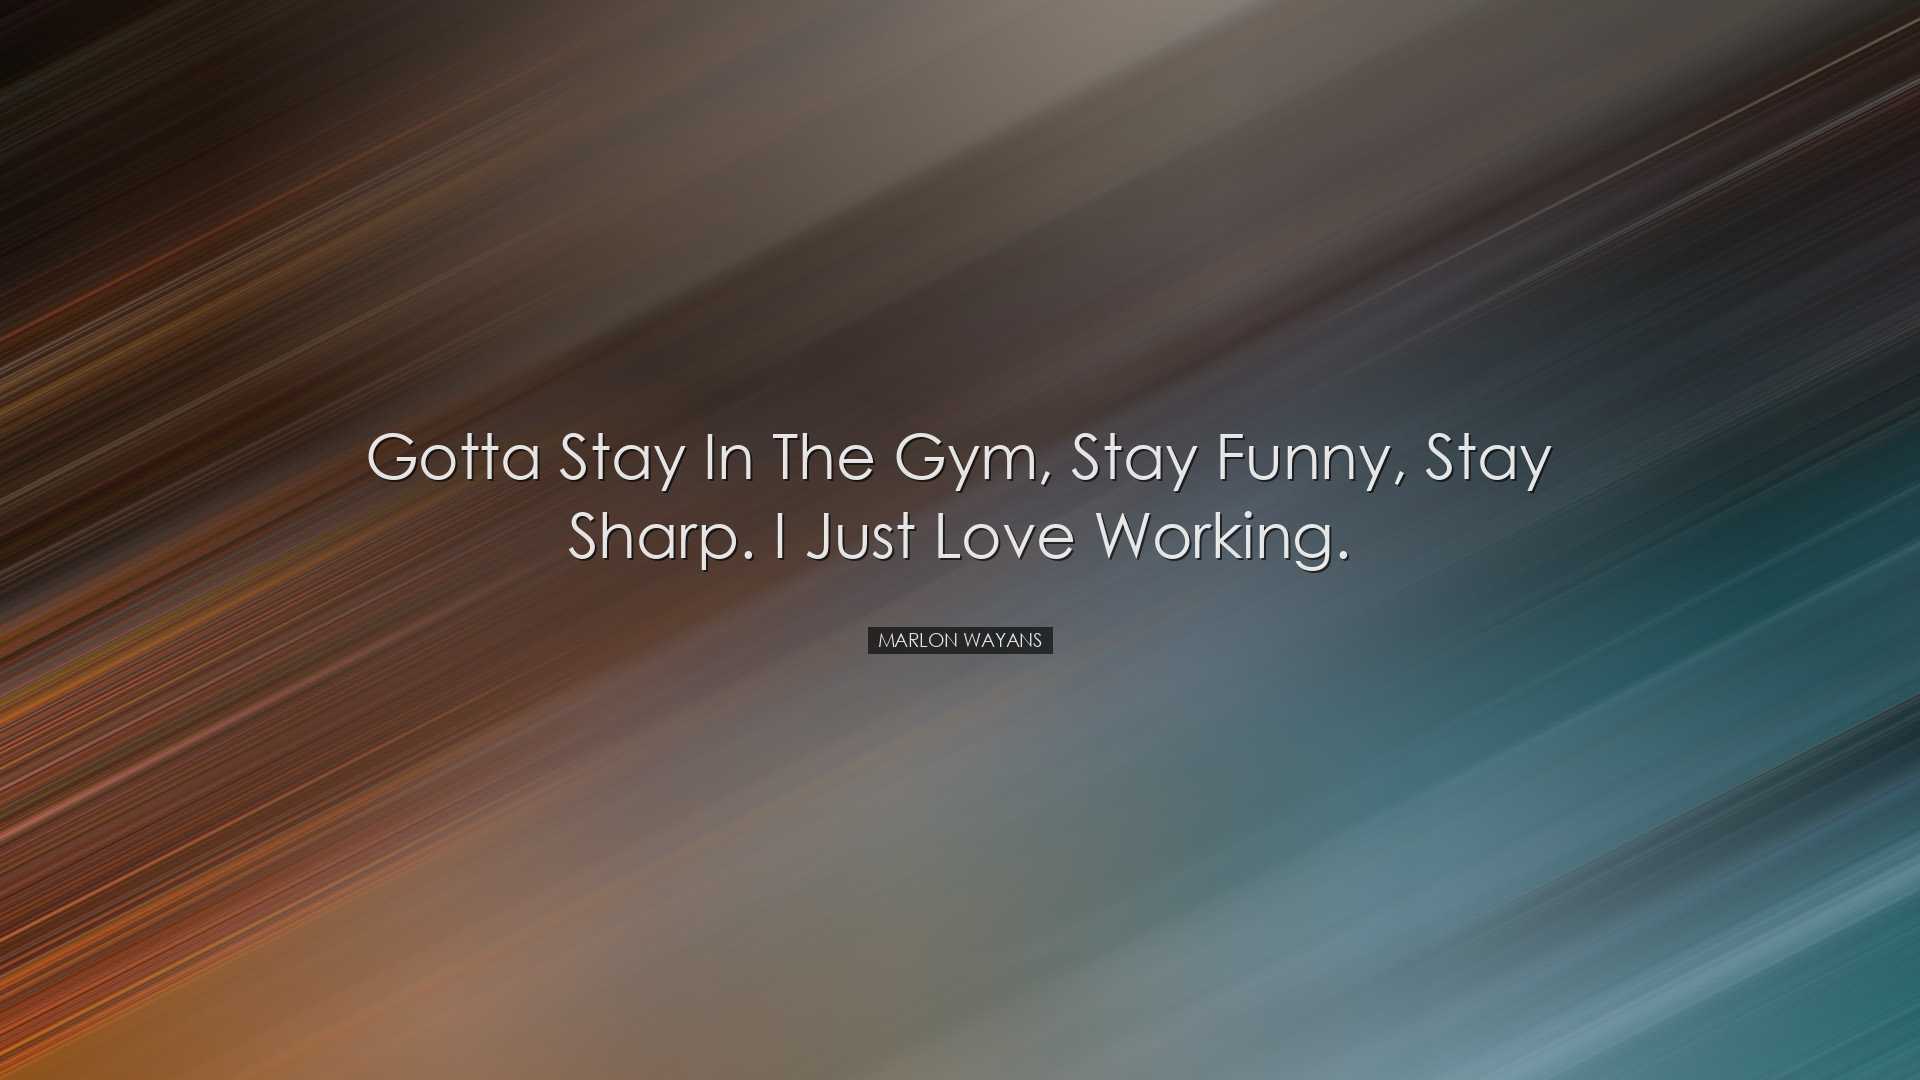 Gotta stay in the gym, stay funny, stay sharp. I just love working